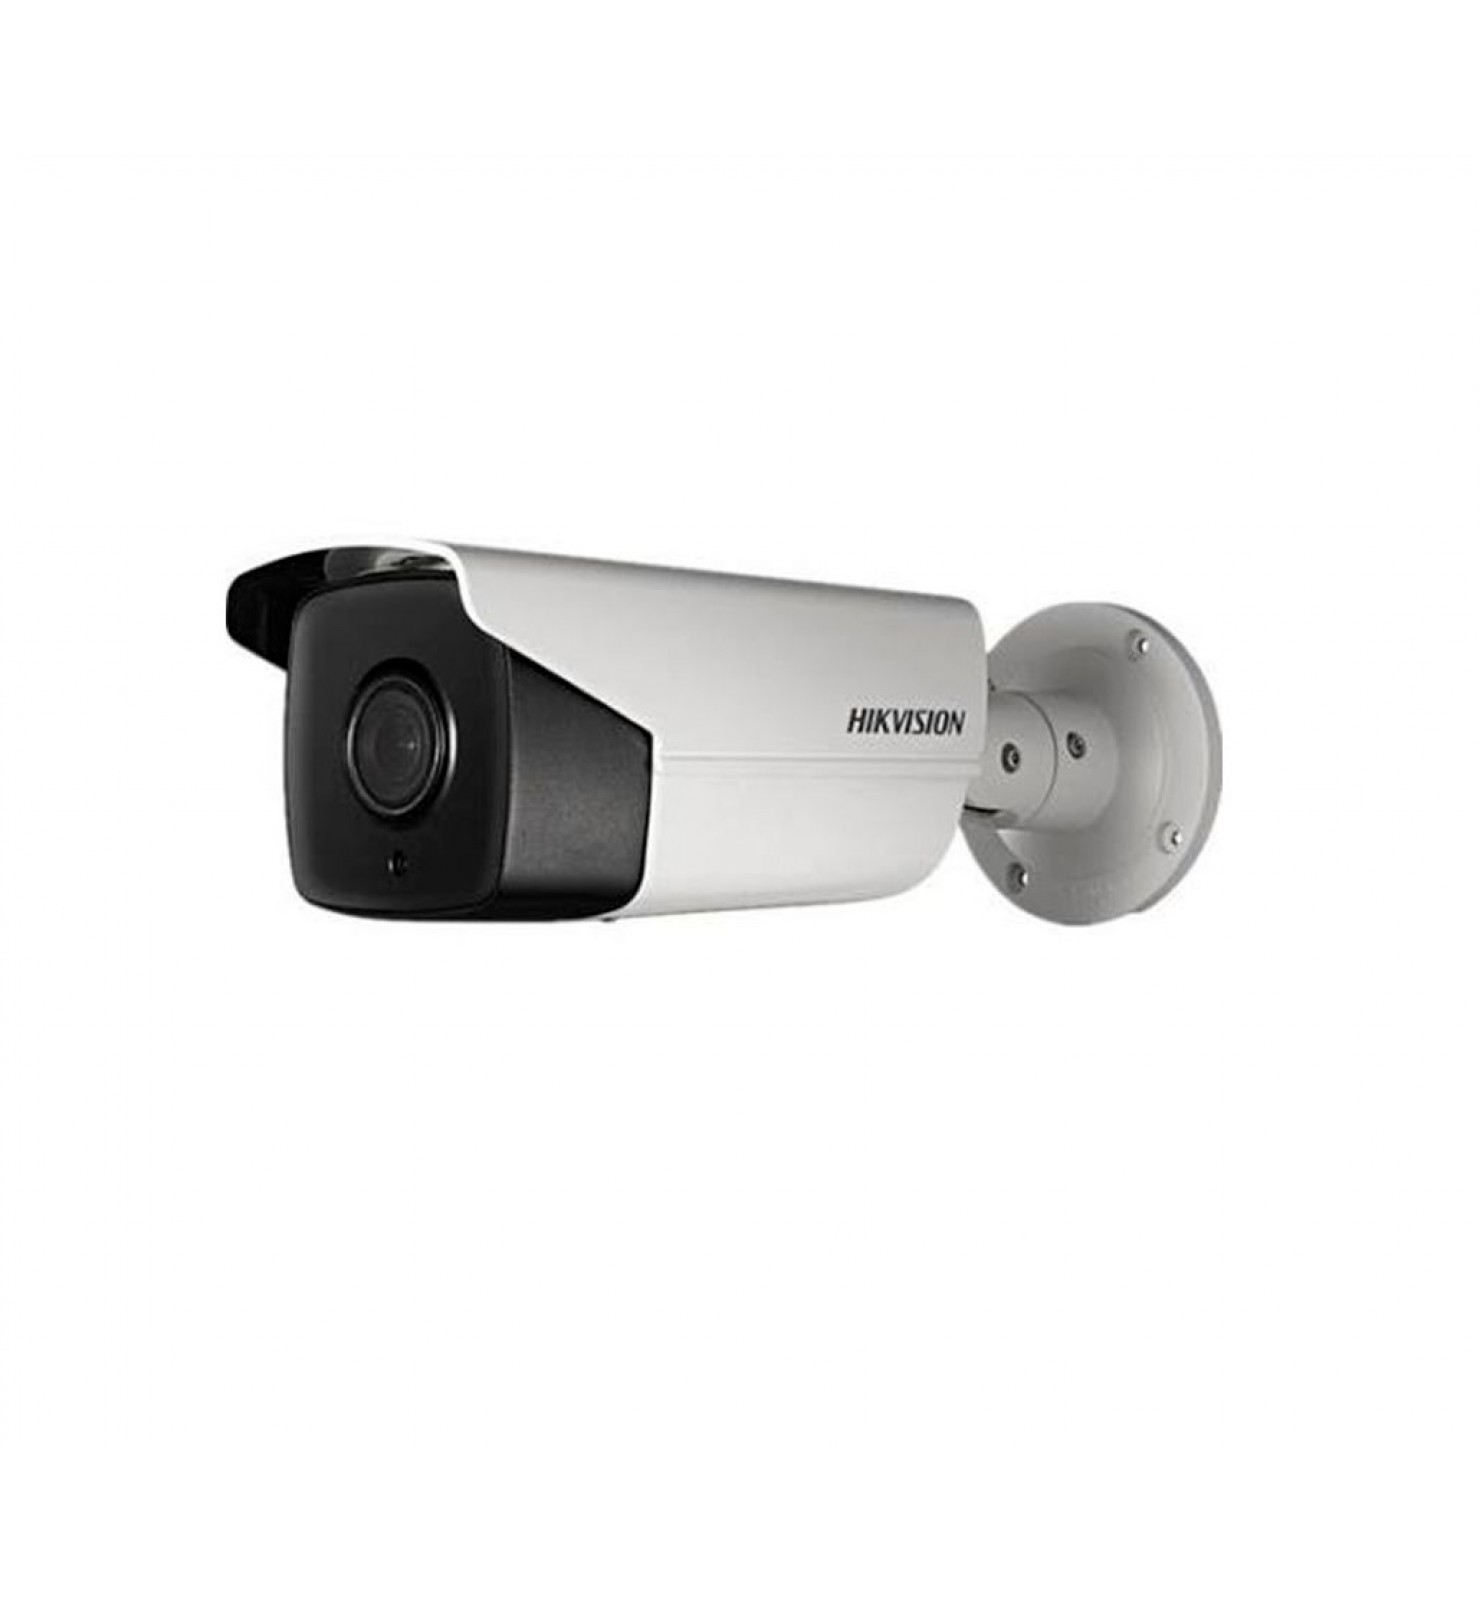 Камера Hikvision DS-2CD2T22WD-I3